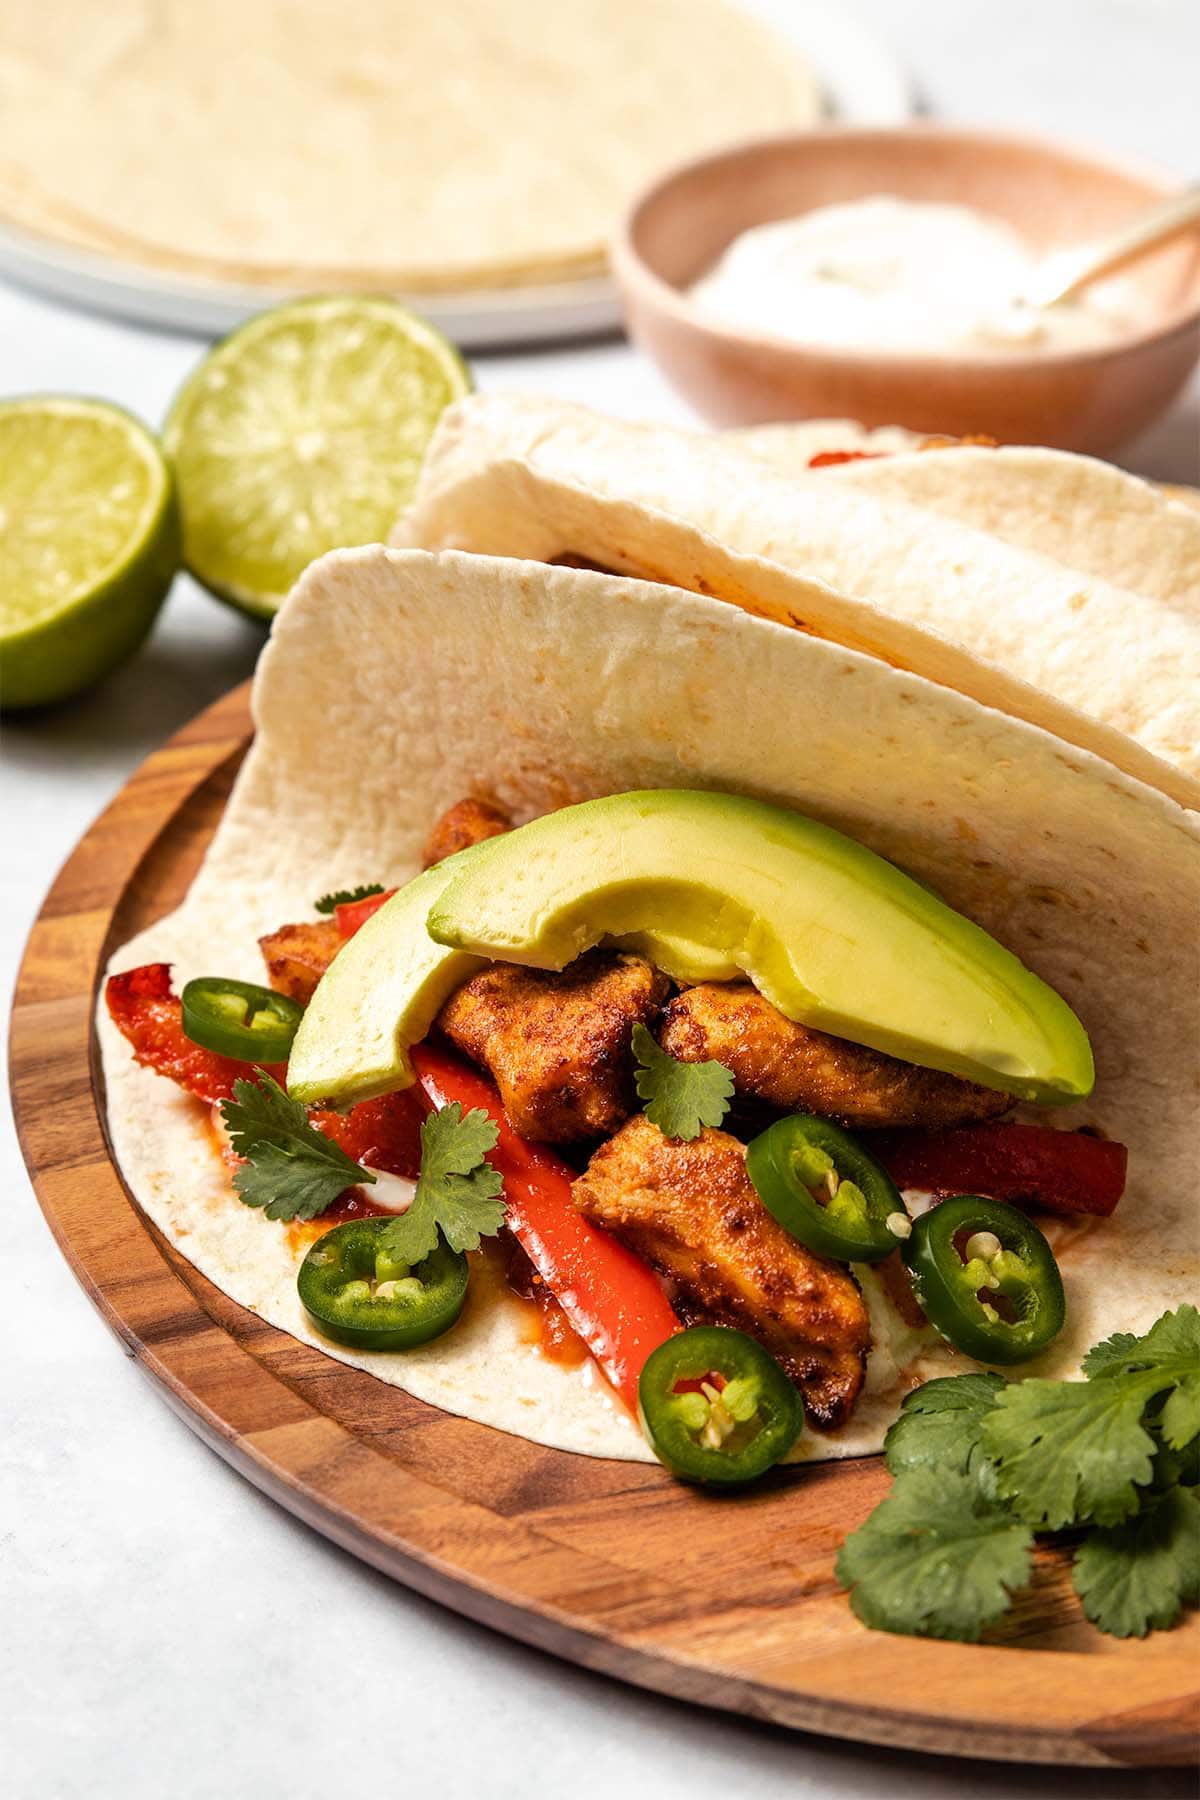 Chicken fajitas garnished with jalapeno, salsa, avocado and cilantro, served on a round wooden board.